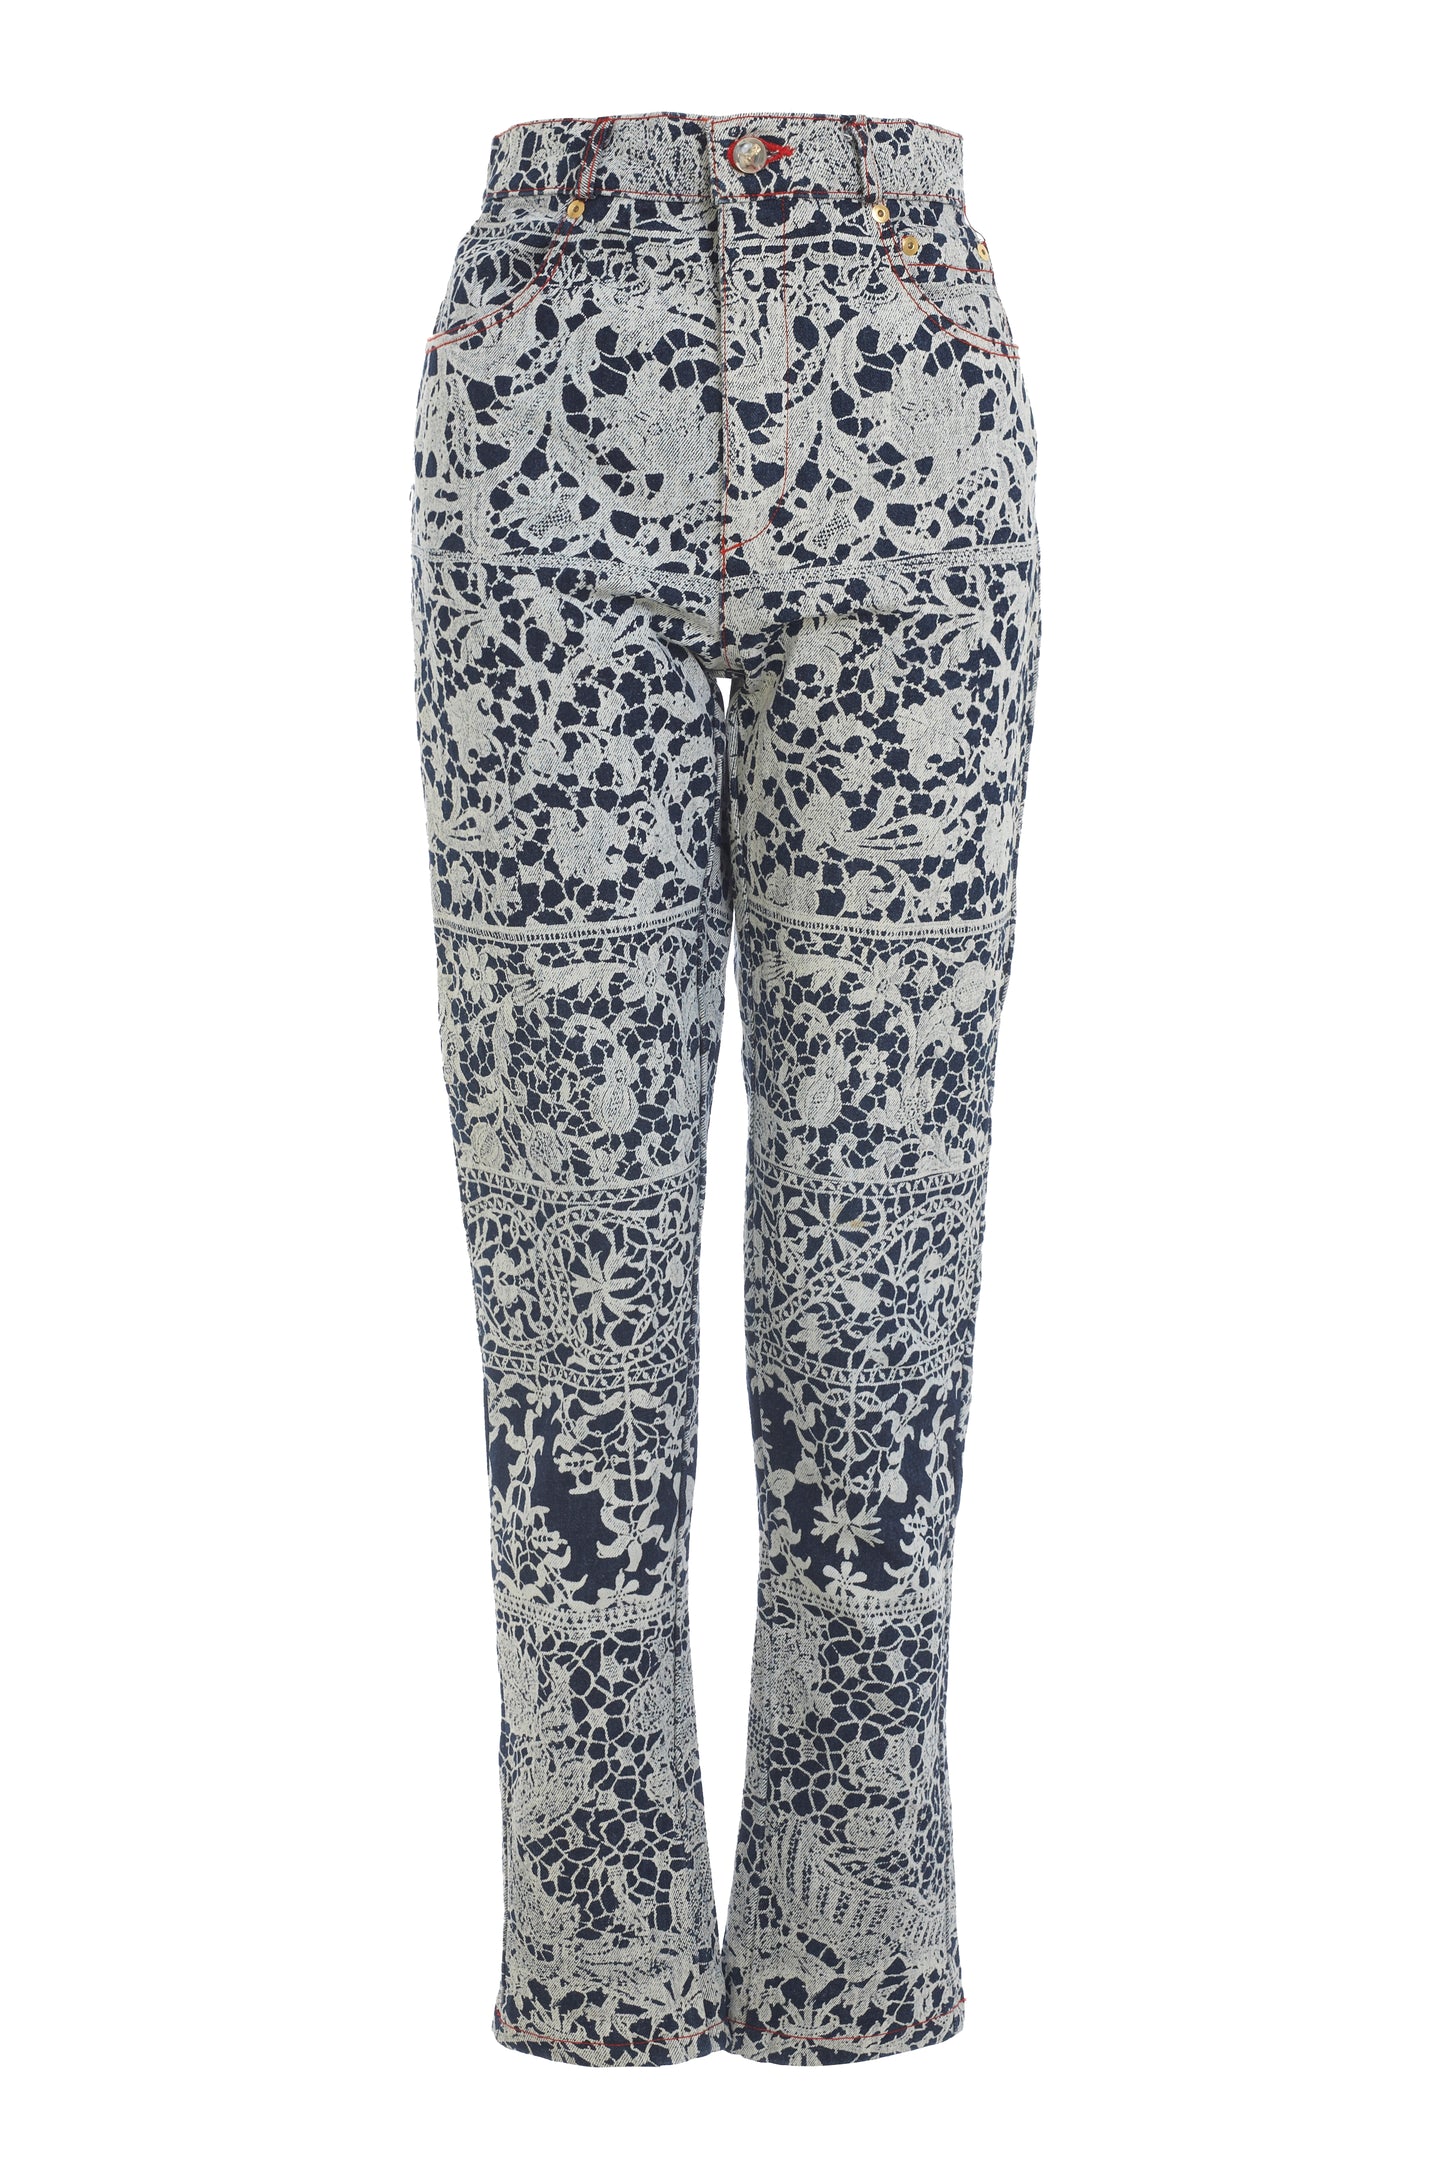 Vivienne Westwood denim jeans with blue and white pattern